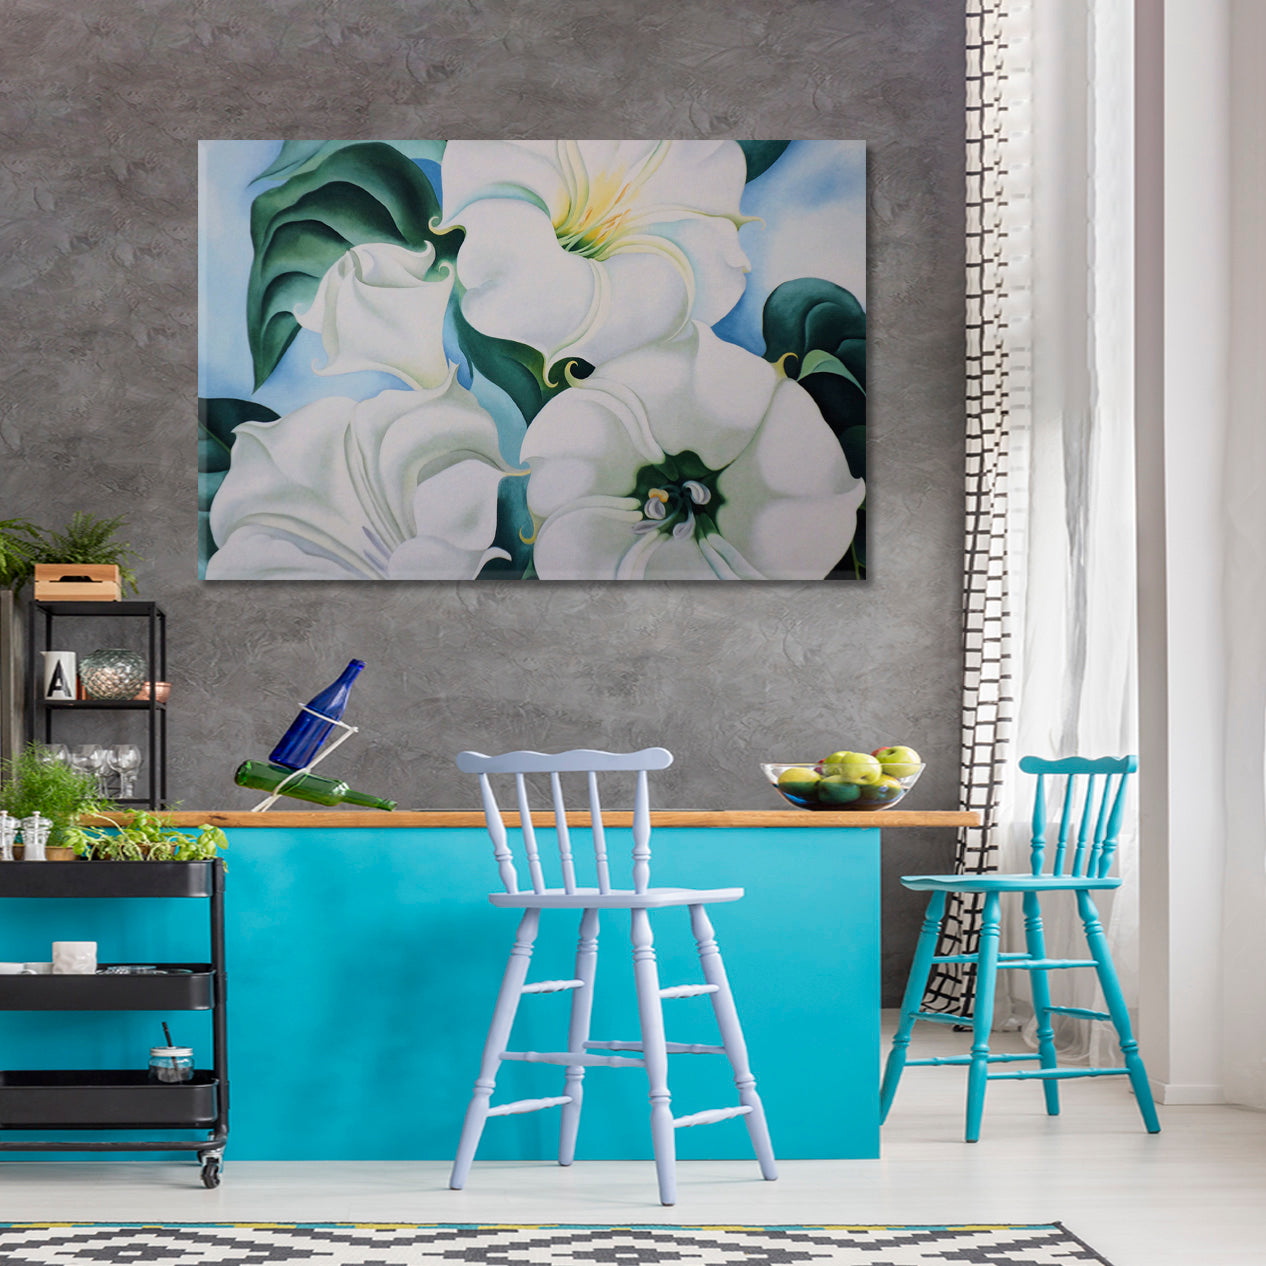 LILY BEAUTY IN DETAILS White Trumpet Lily Flower Floral & Botanical Split Art Artesty 1 panel 24" x 16" 